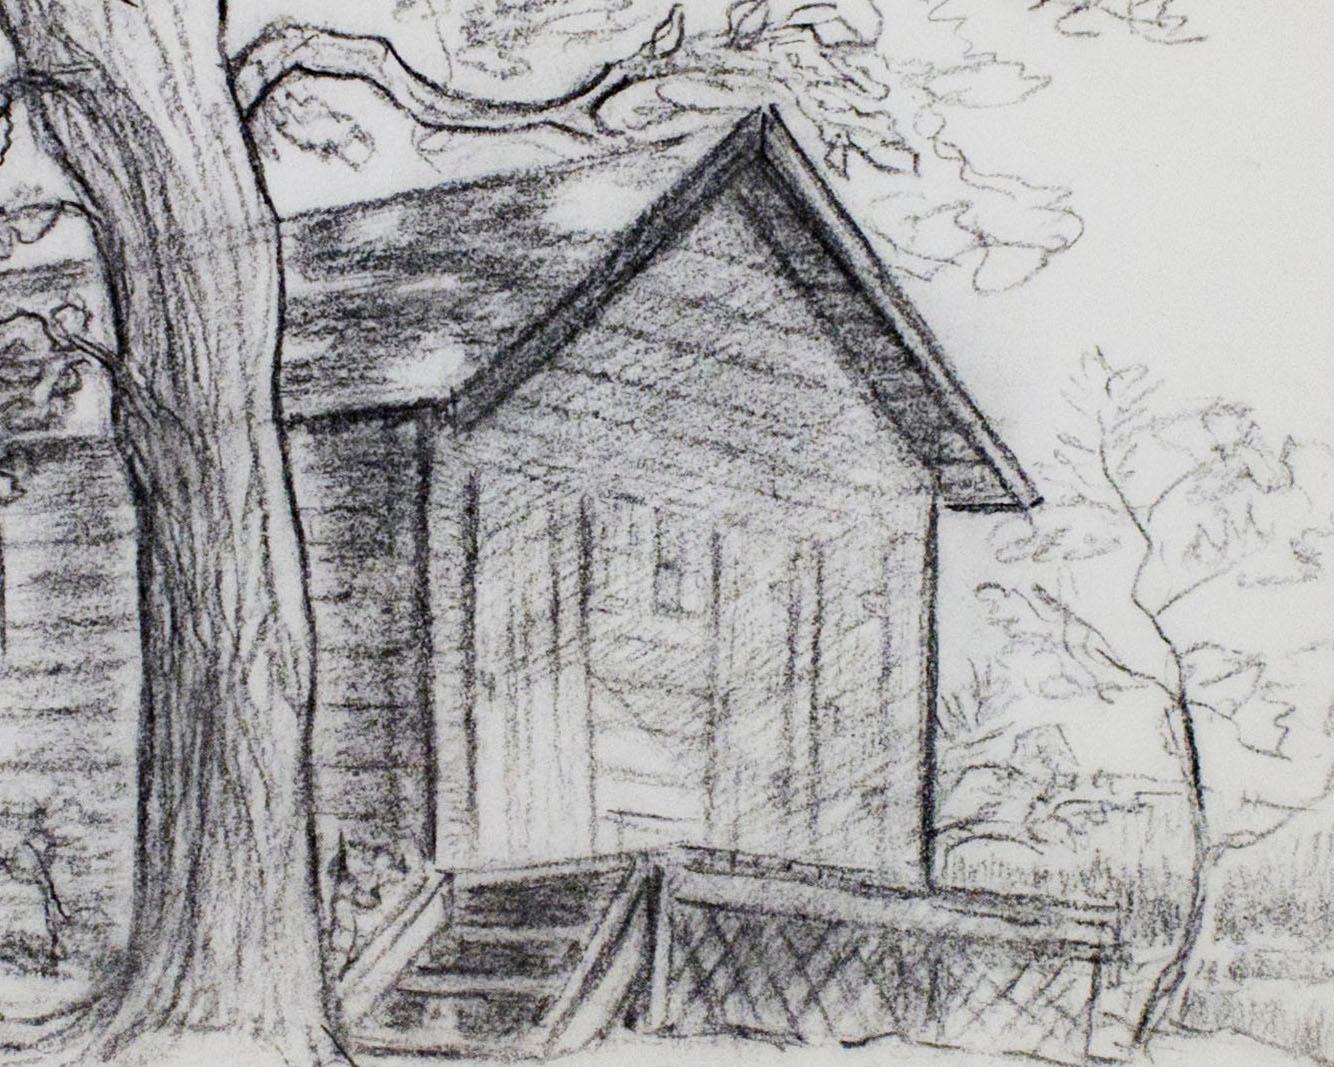 In this drawing, Sylvia Spicuzza presents the viewer with a lakeside cabin under the shade of a massive tree. This drawing is reminiscent of the work done by her father Francesco, who is better known for landscapes in the Impressionist style. 

12 x